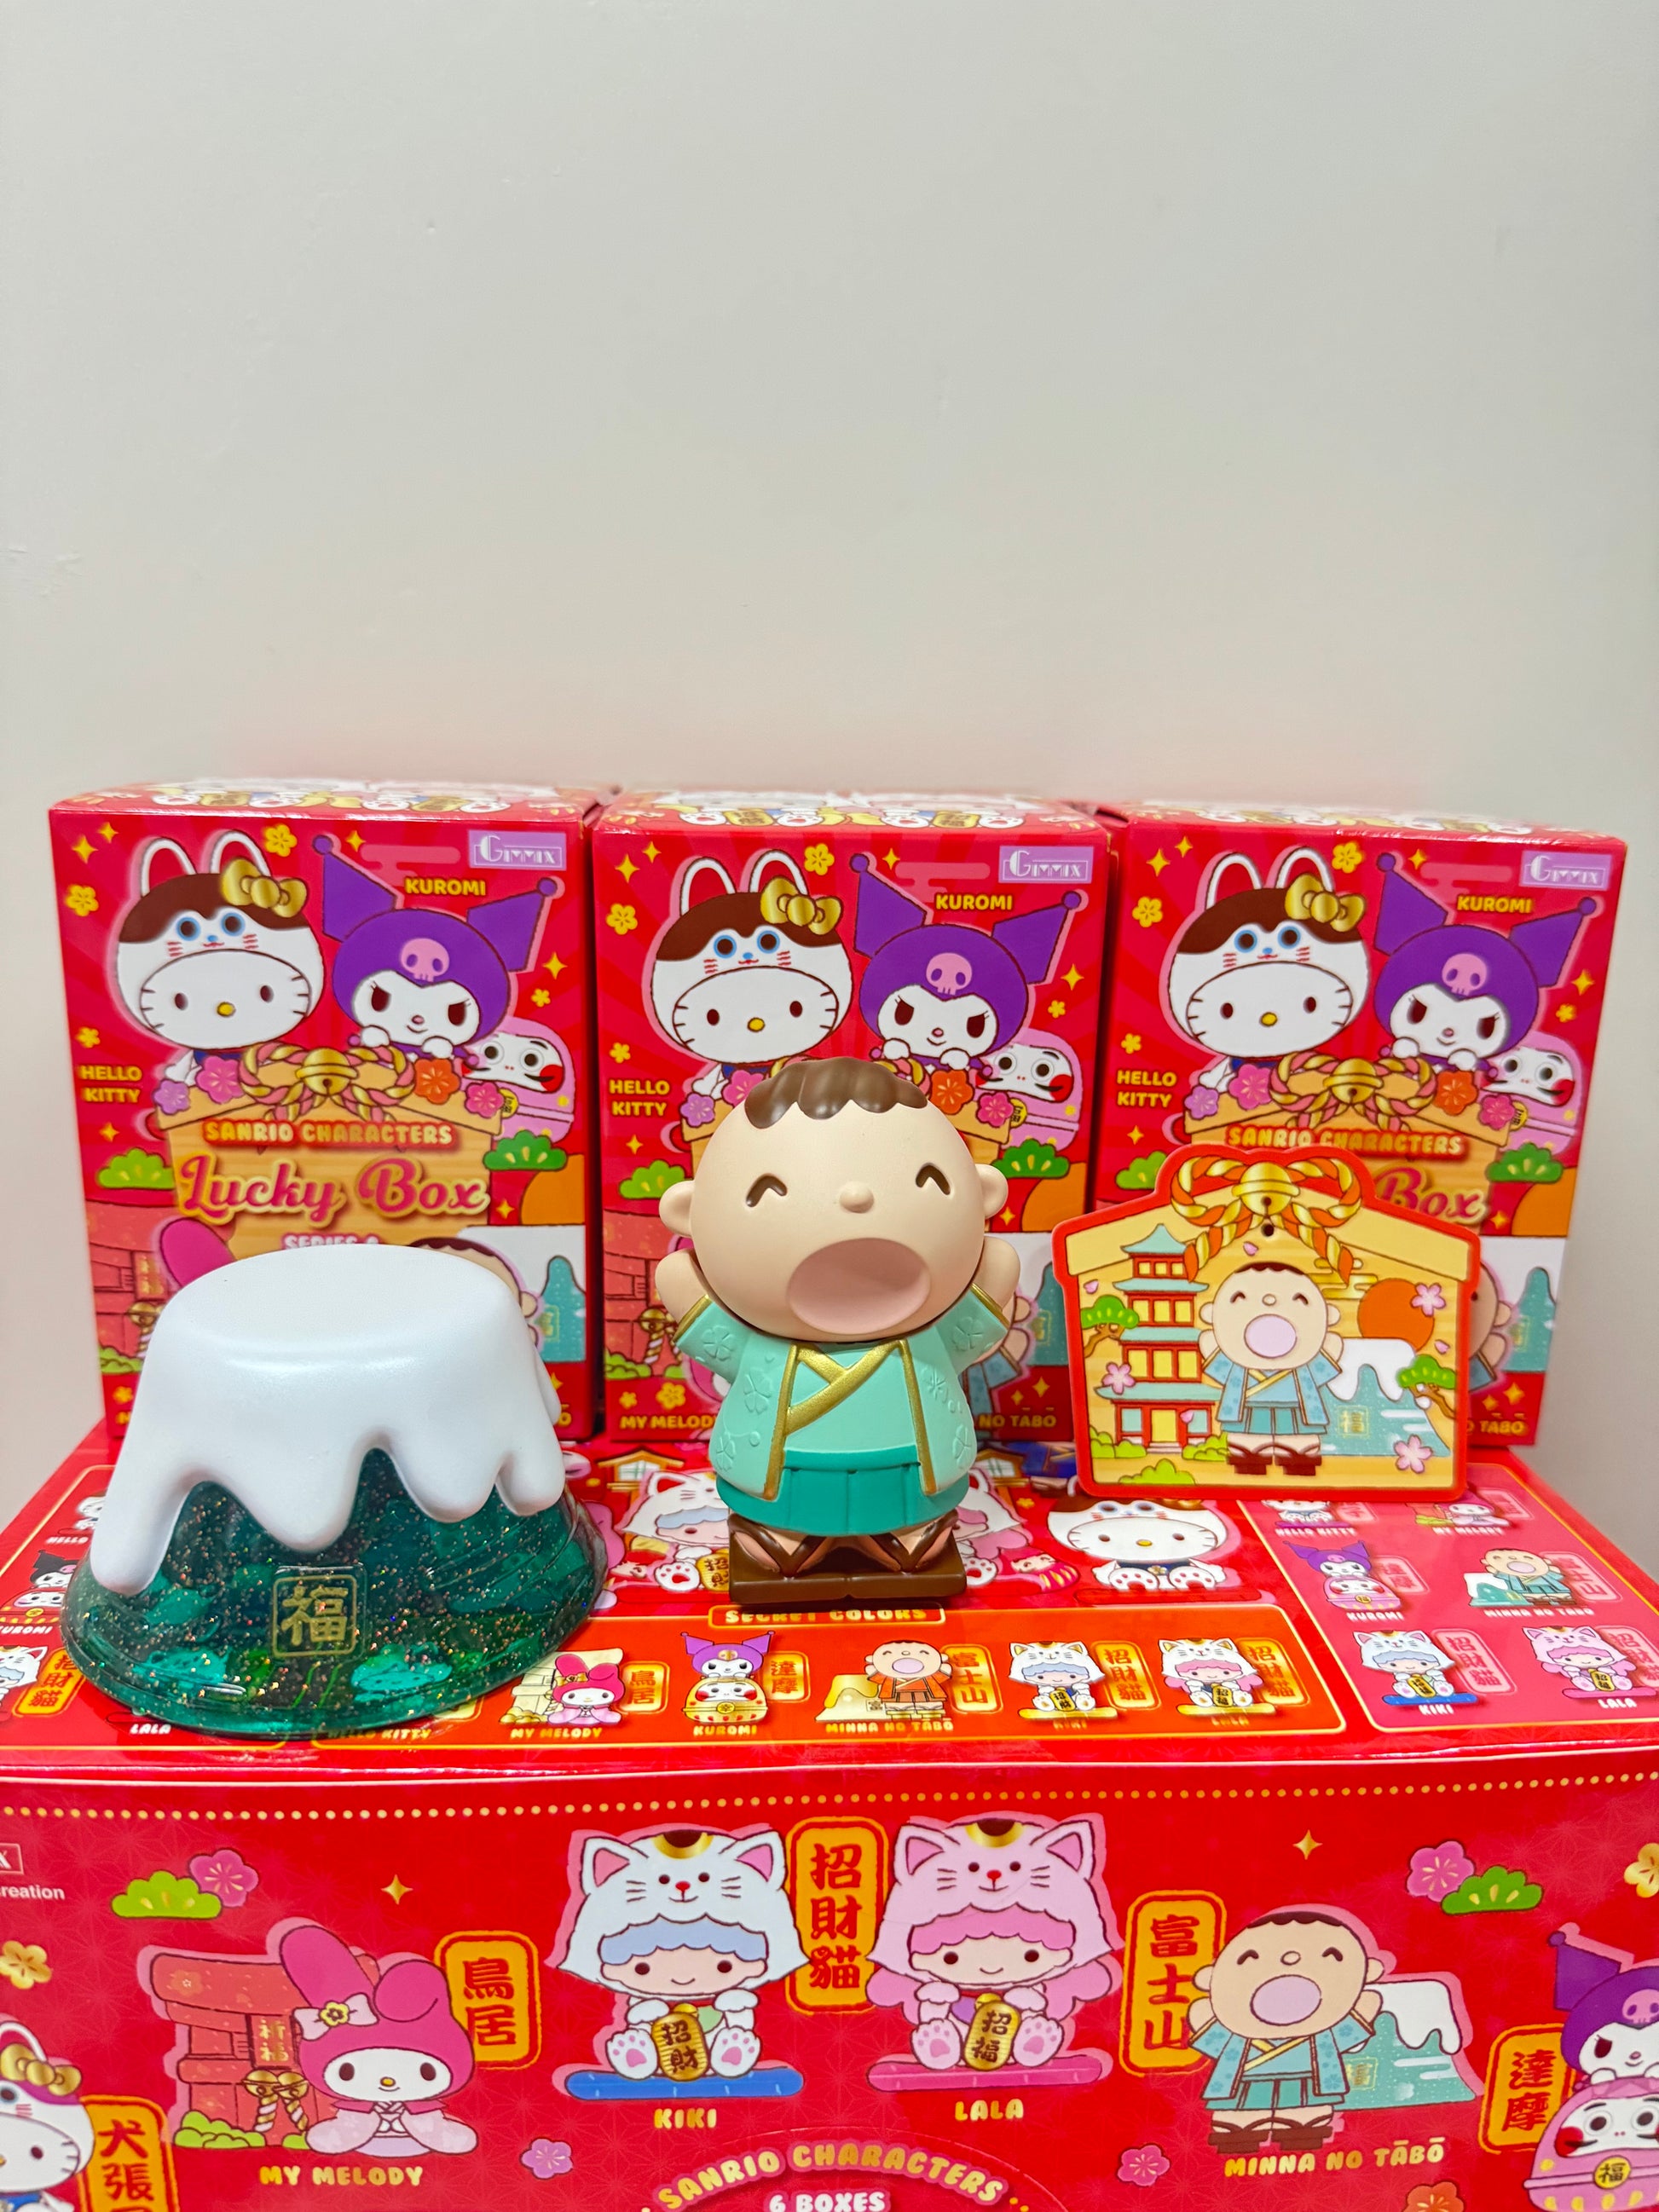 Mystery Blind Box Sanrio Characters Vinly Figure Lucky Box | Series A+B+Secret full set of 3 Minna No Tabo Fuji Mount - Kawaii Collectable Toys